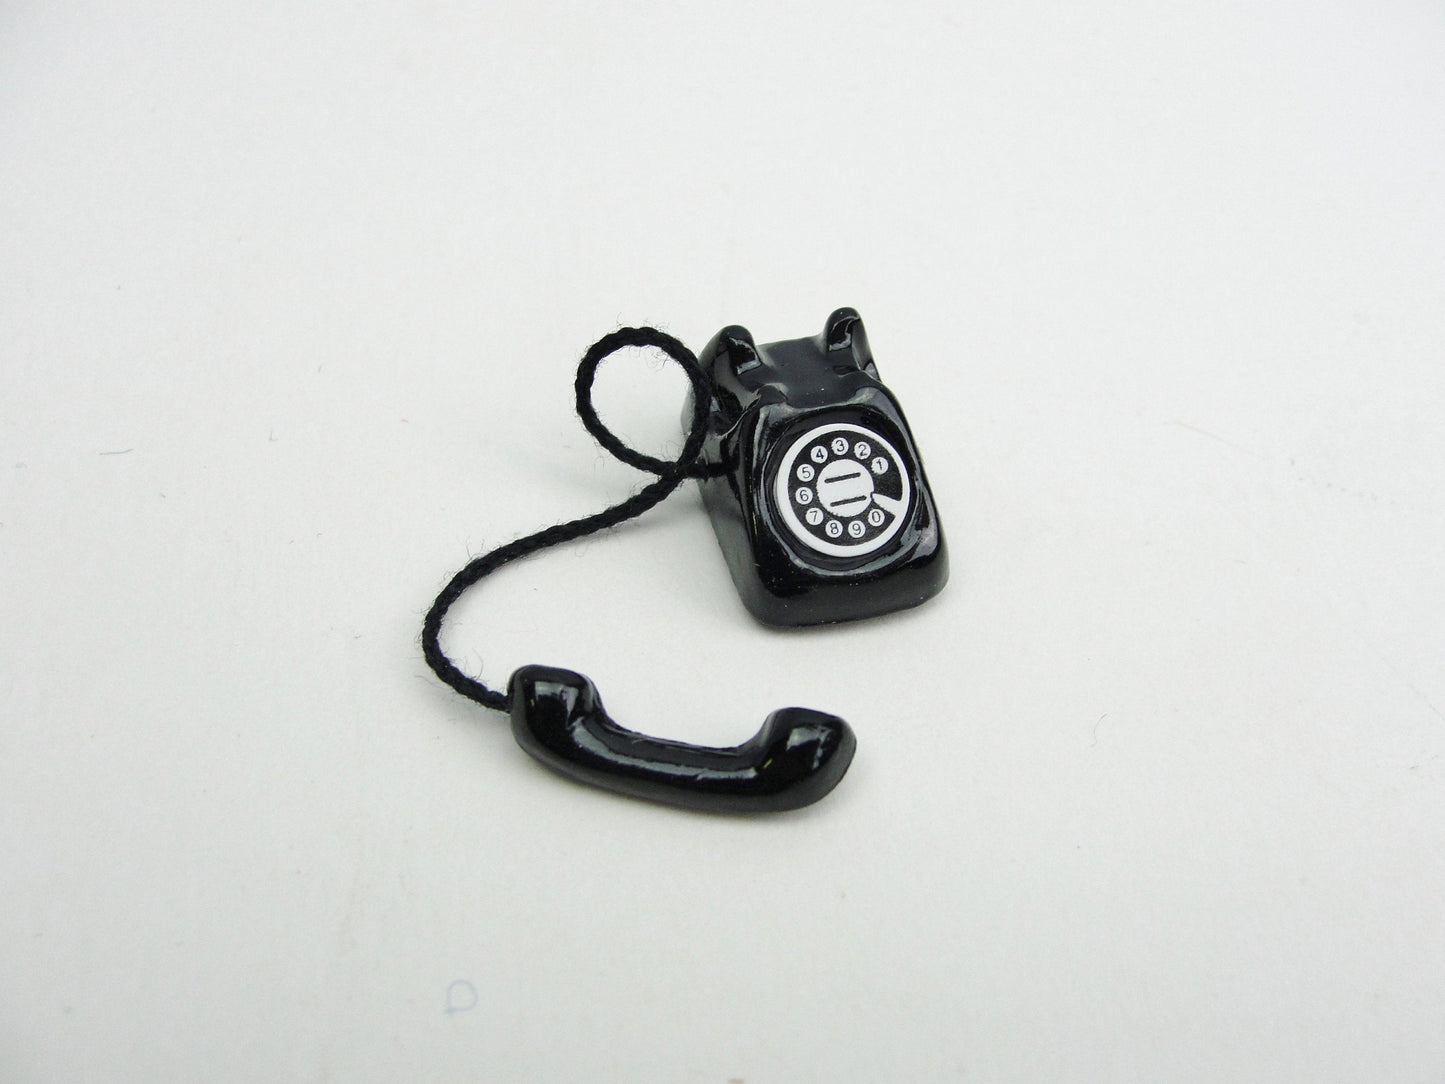 Dollhouse miniature black or red telephone